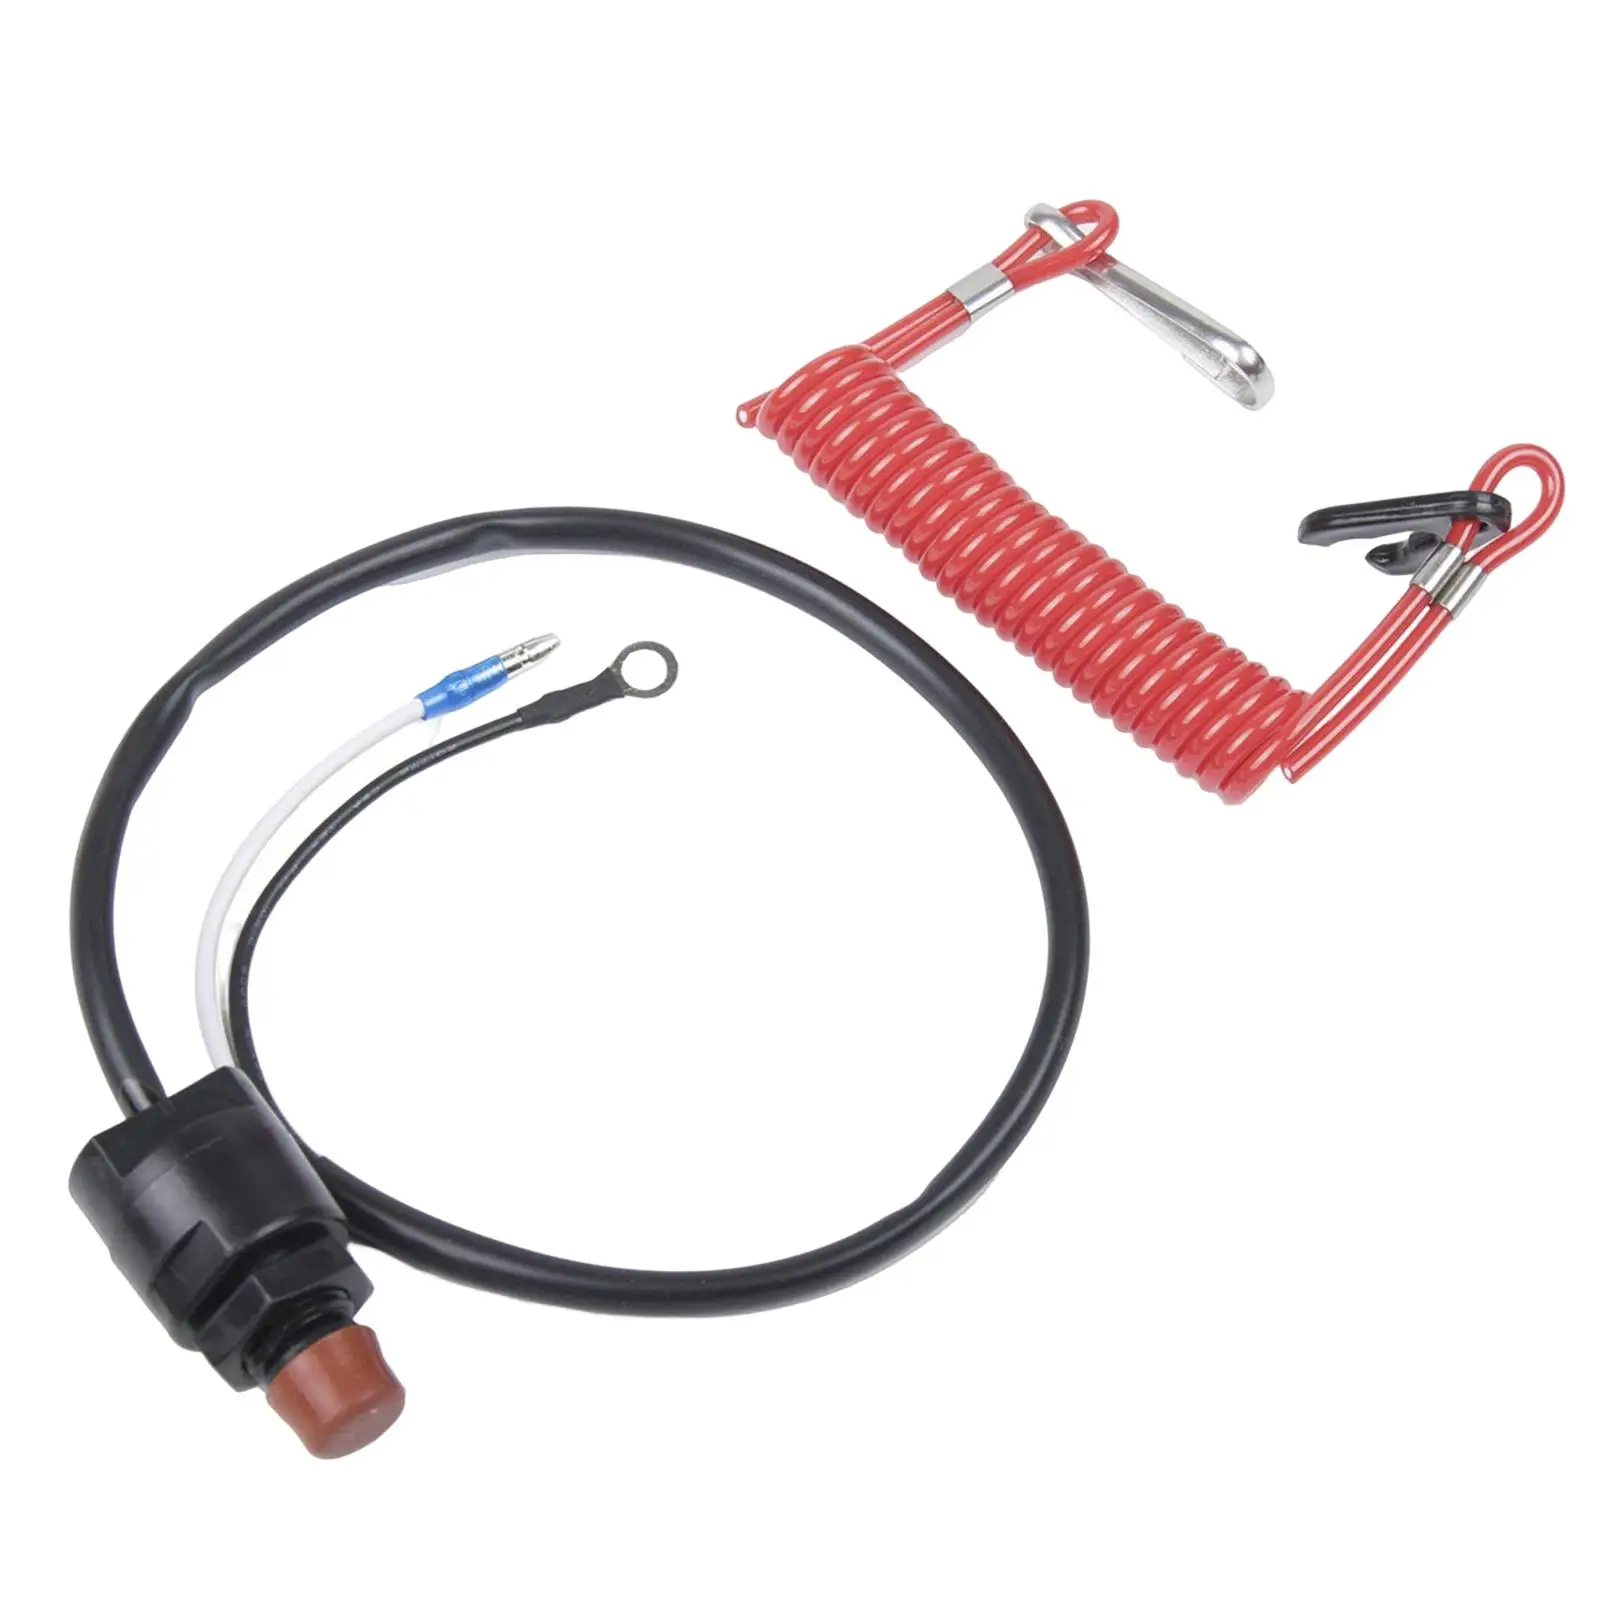 Flameout Switch Ignition Rope  Engine Stop Kill Switch for Motorboat